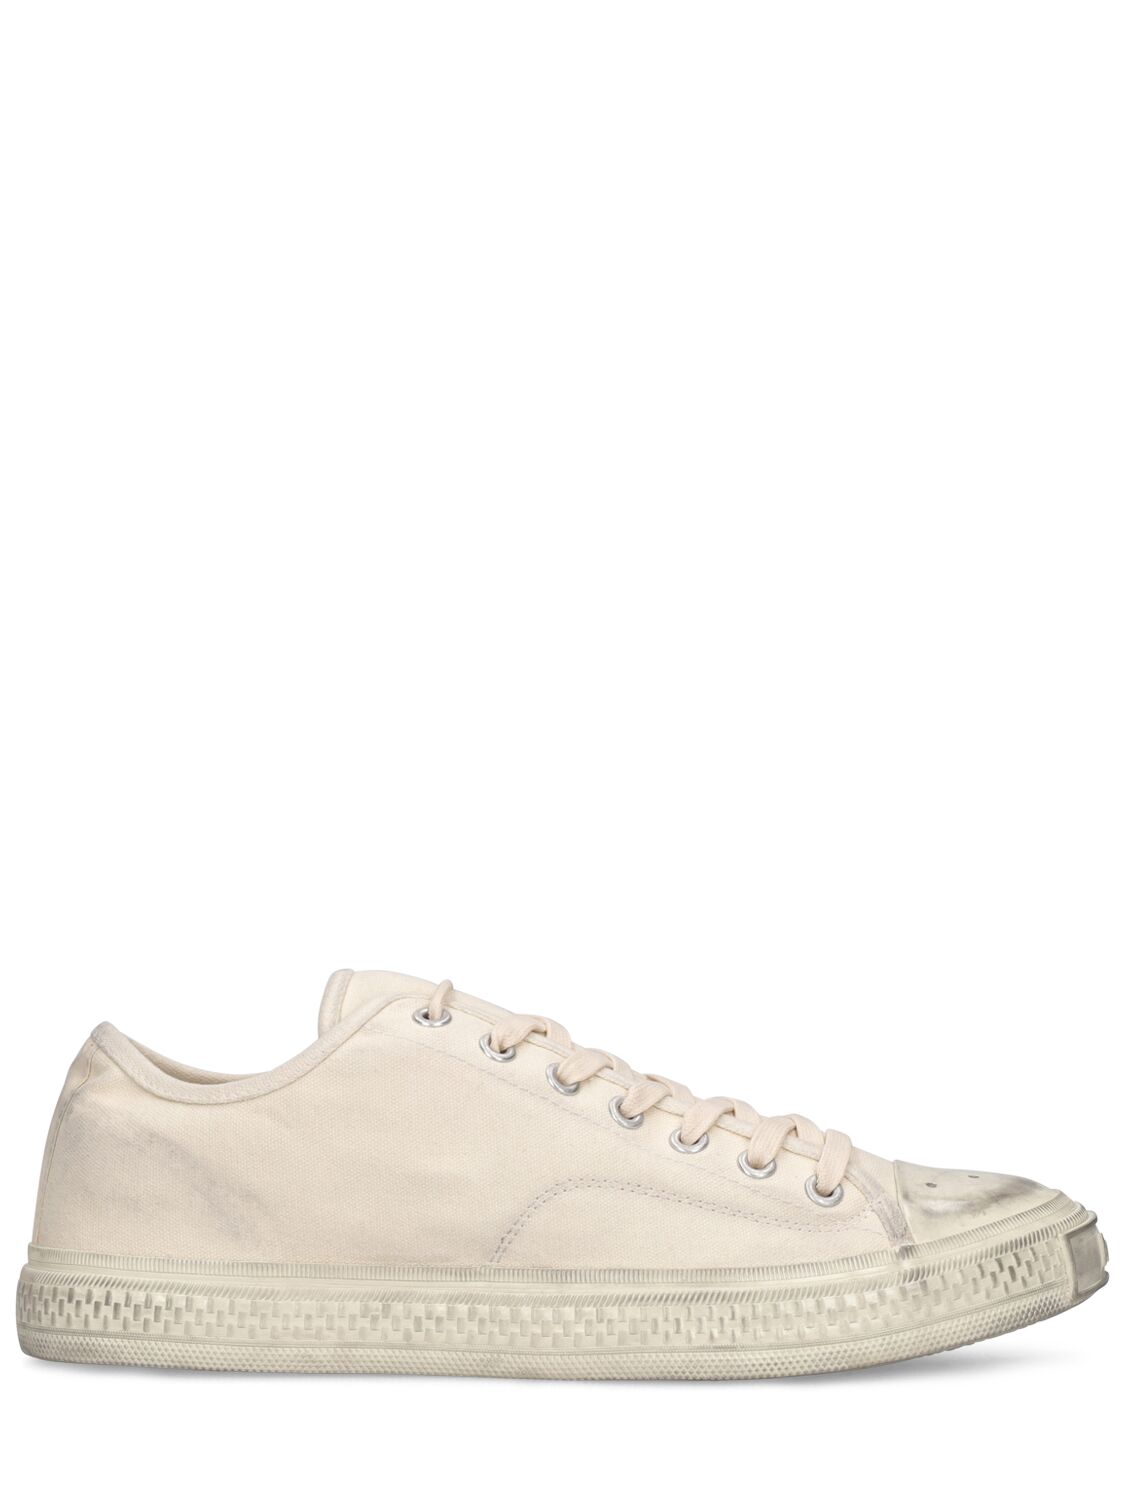 Acne Studios Ballow Soft Tumbled Cotton Trainers In Off White